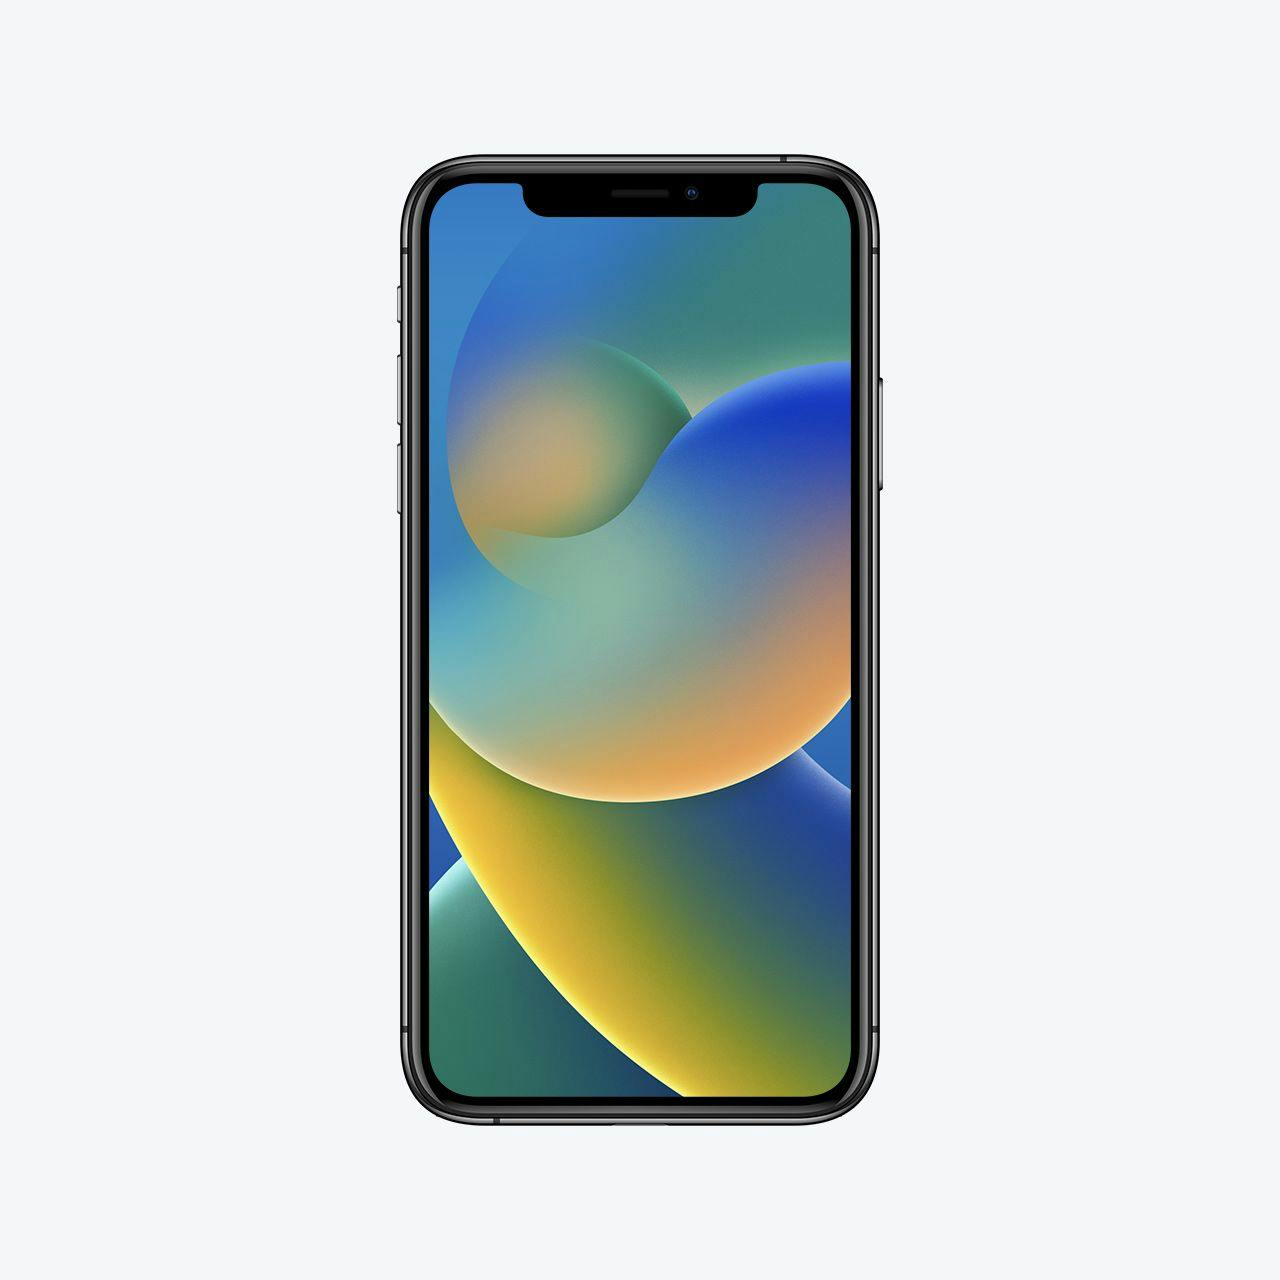 Image of iPhone X.